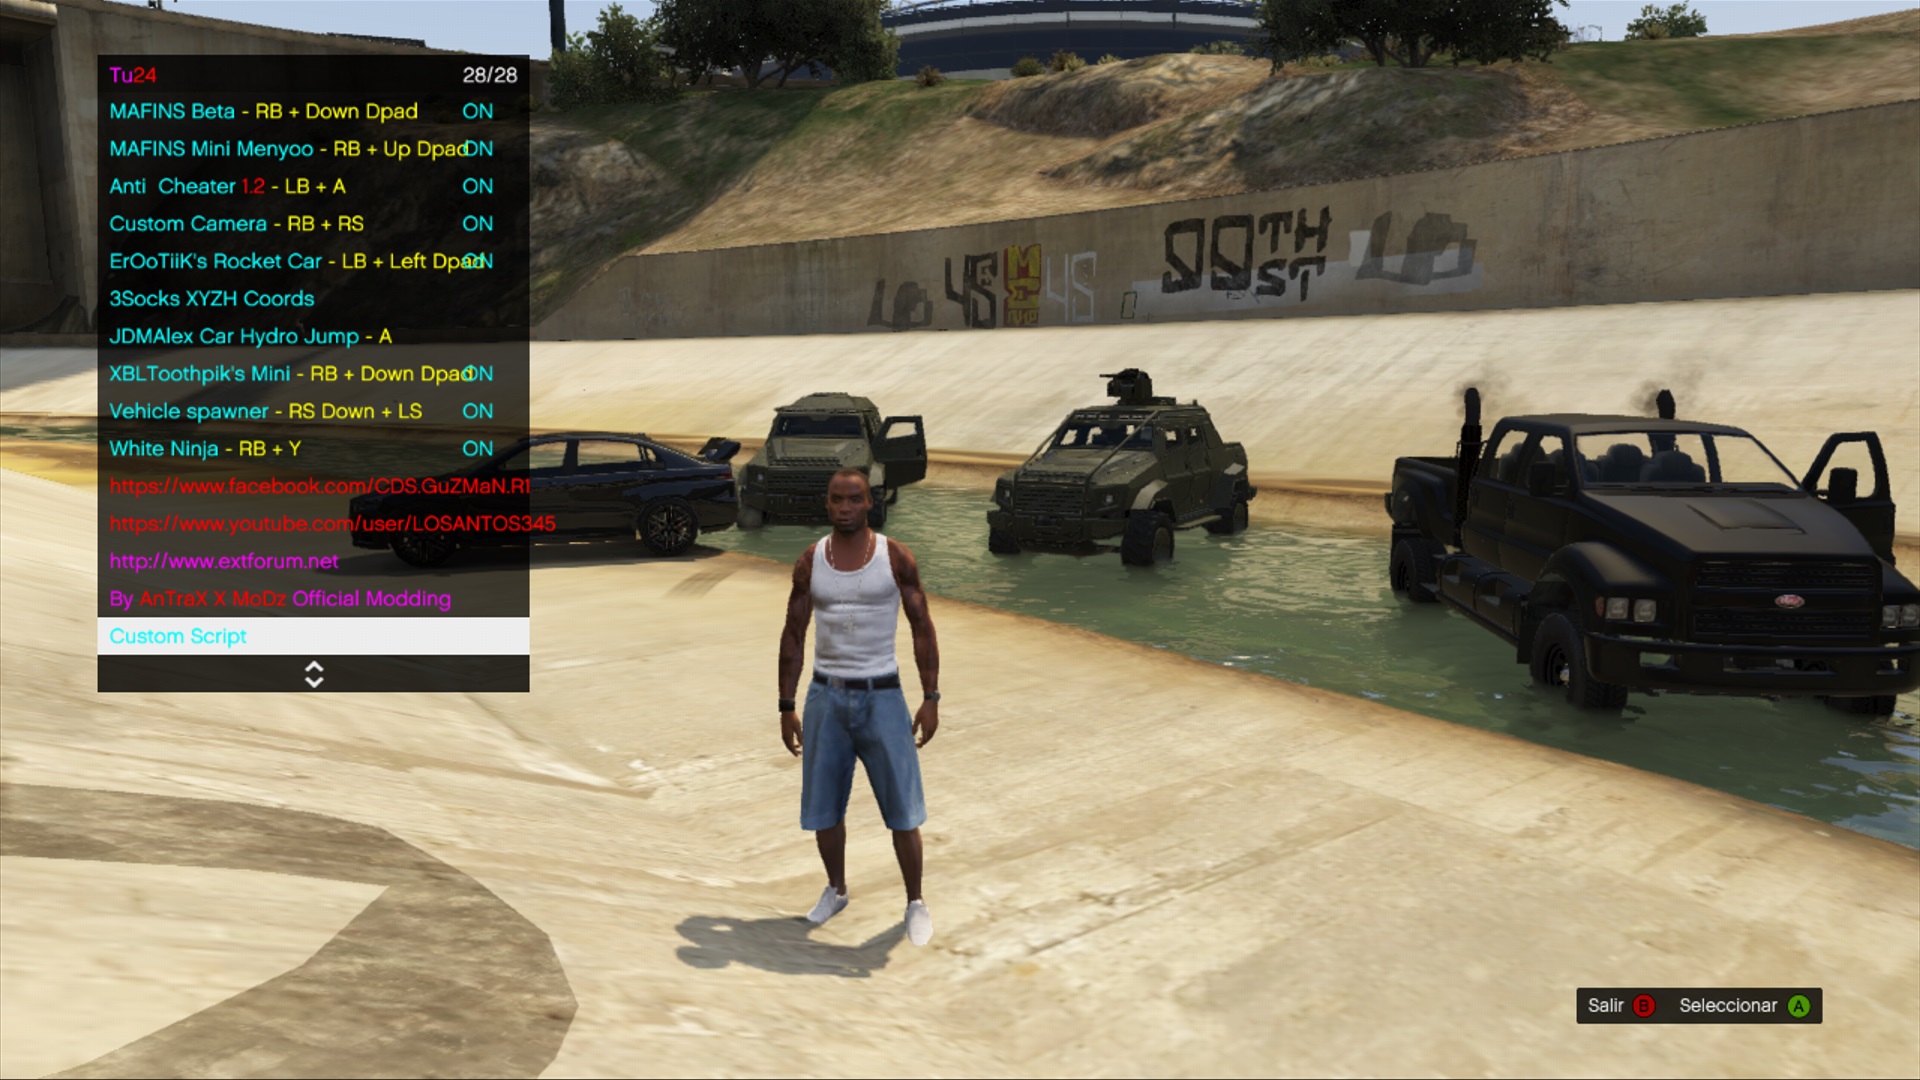 GTA 5 : How To Install a Mod Menu On Xbox One ( NEW! ) 